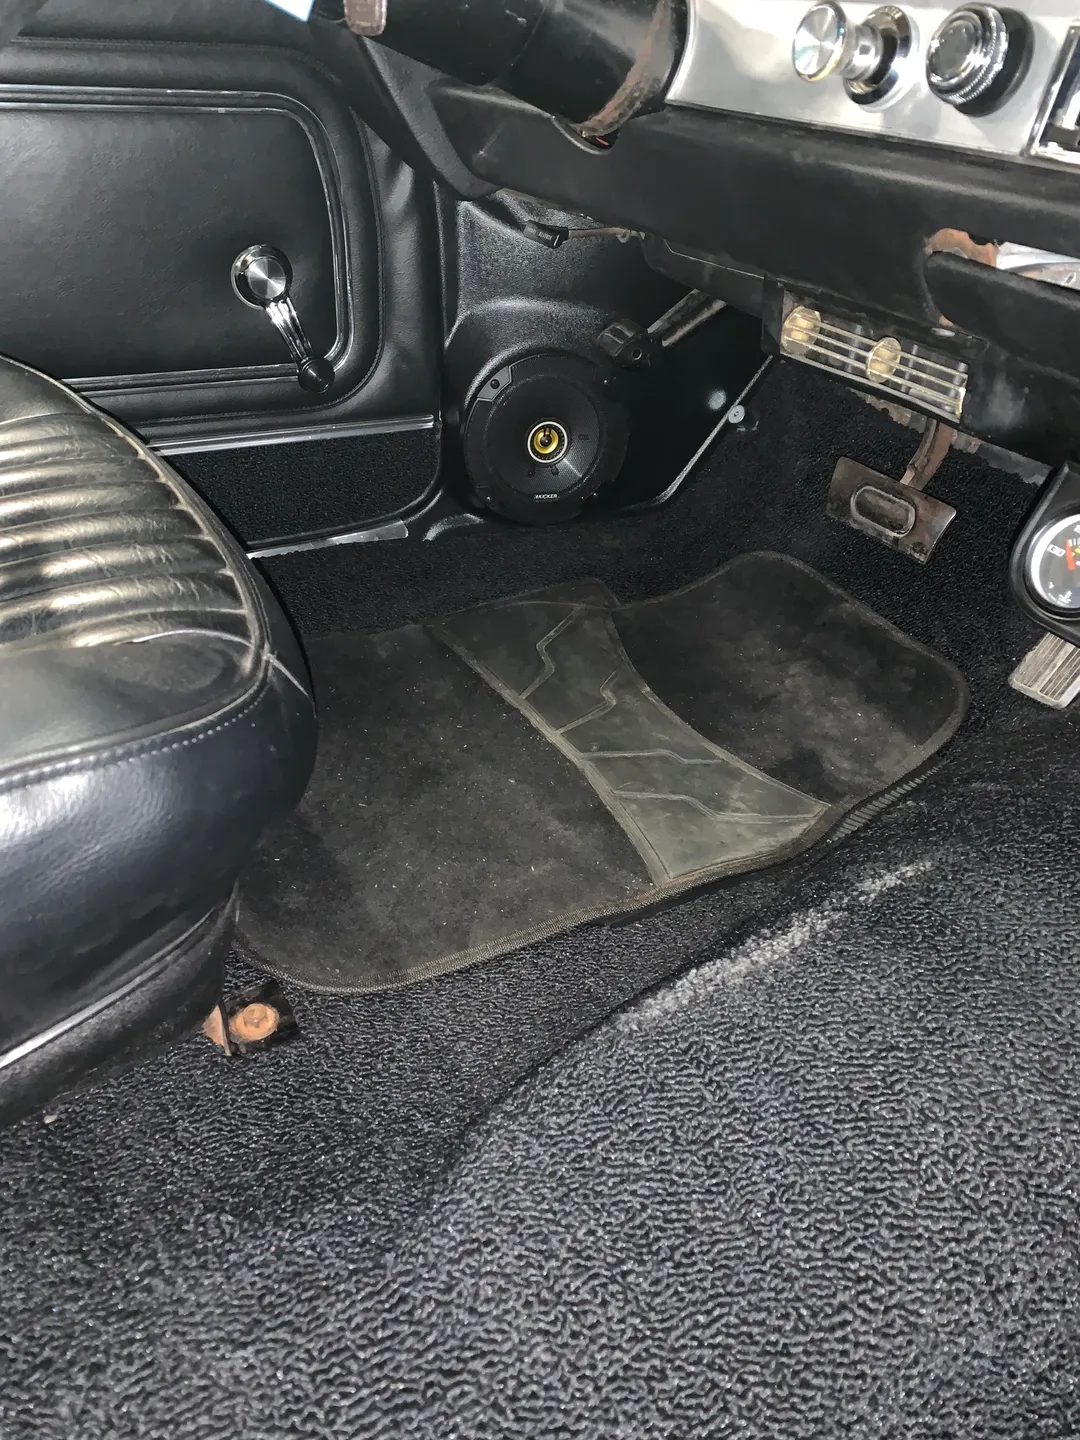 A black carpet cover for under the car seat